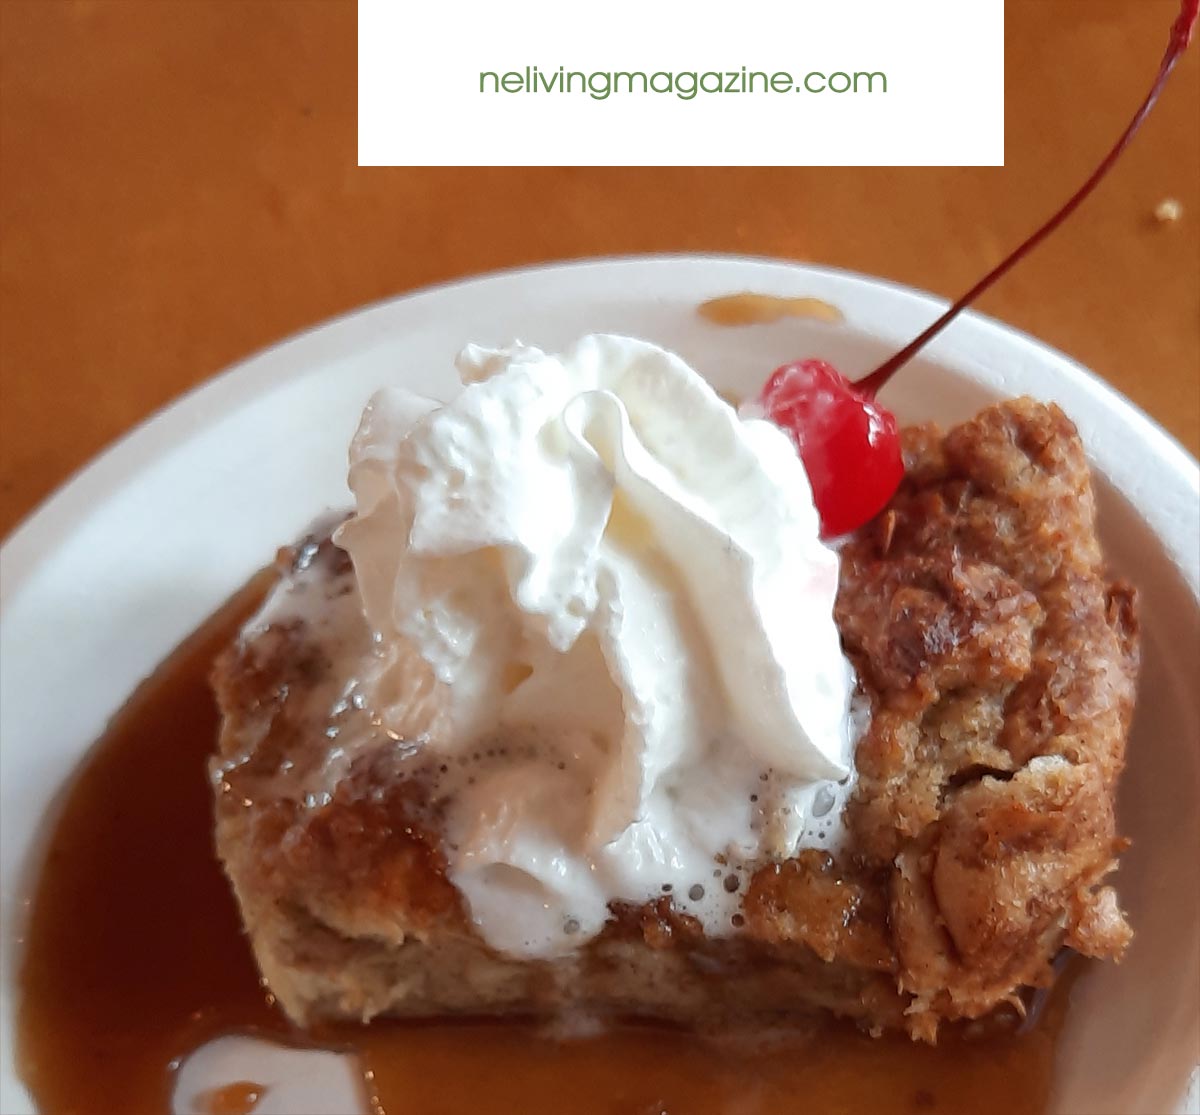 House-made bread pudding with whiskey sauce and whipped cream